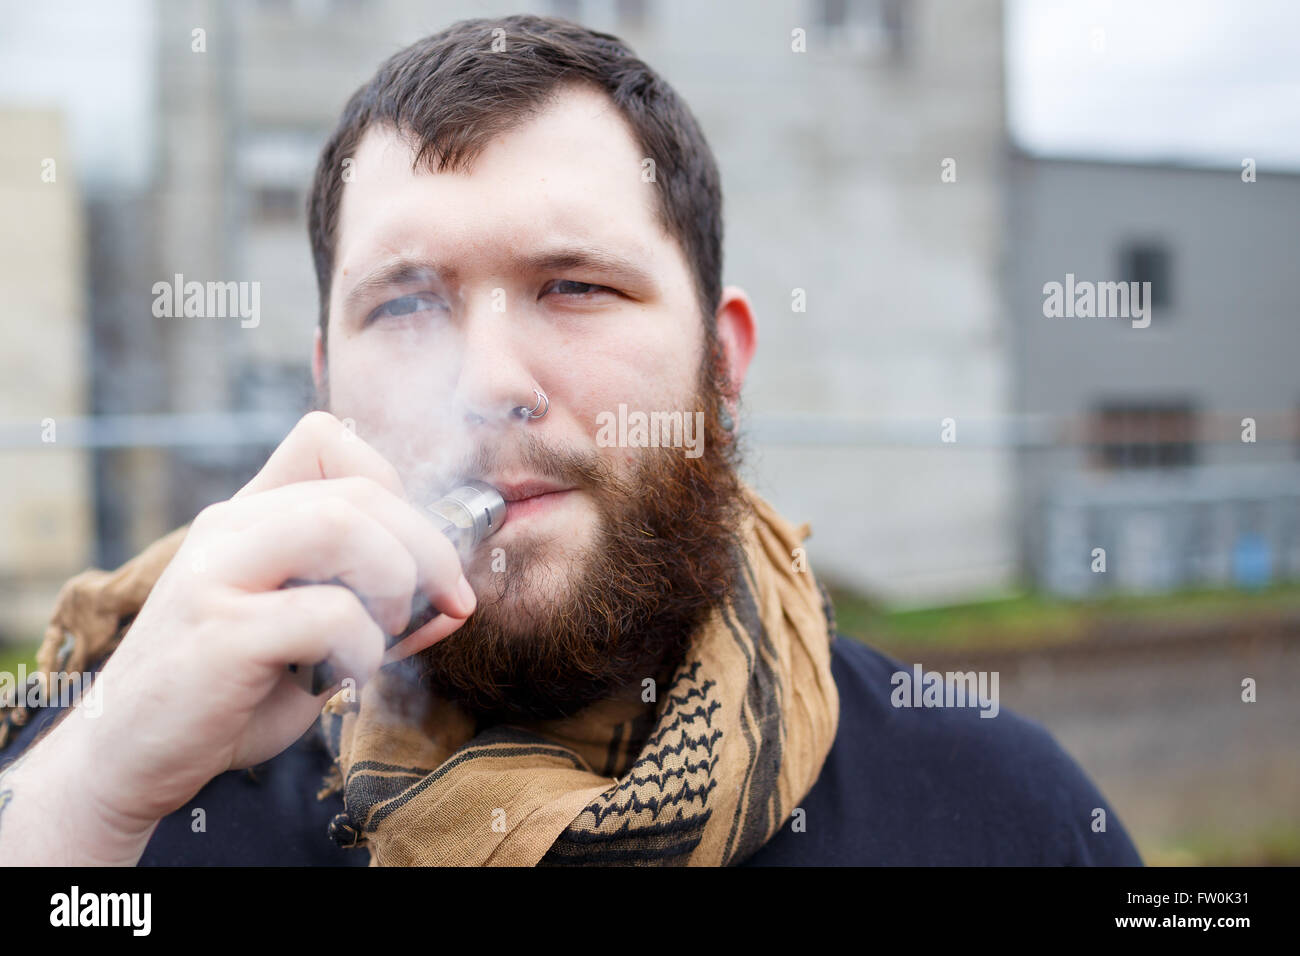 Urban lifestyle portrait of a man vaping in an urban environment with a custom vape mod device. Stock Photo